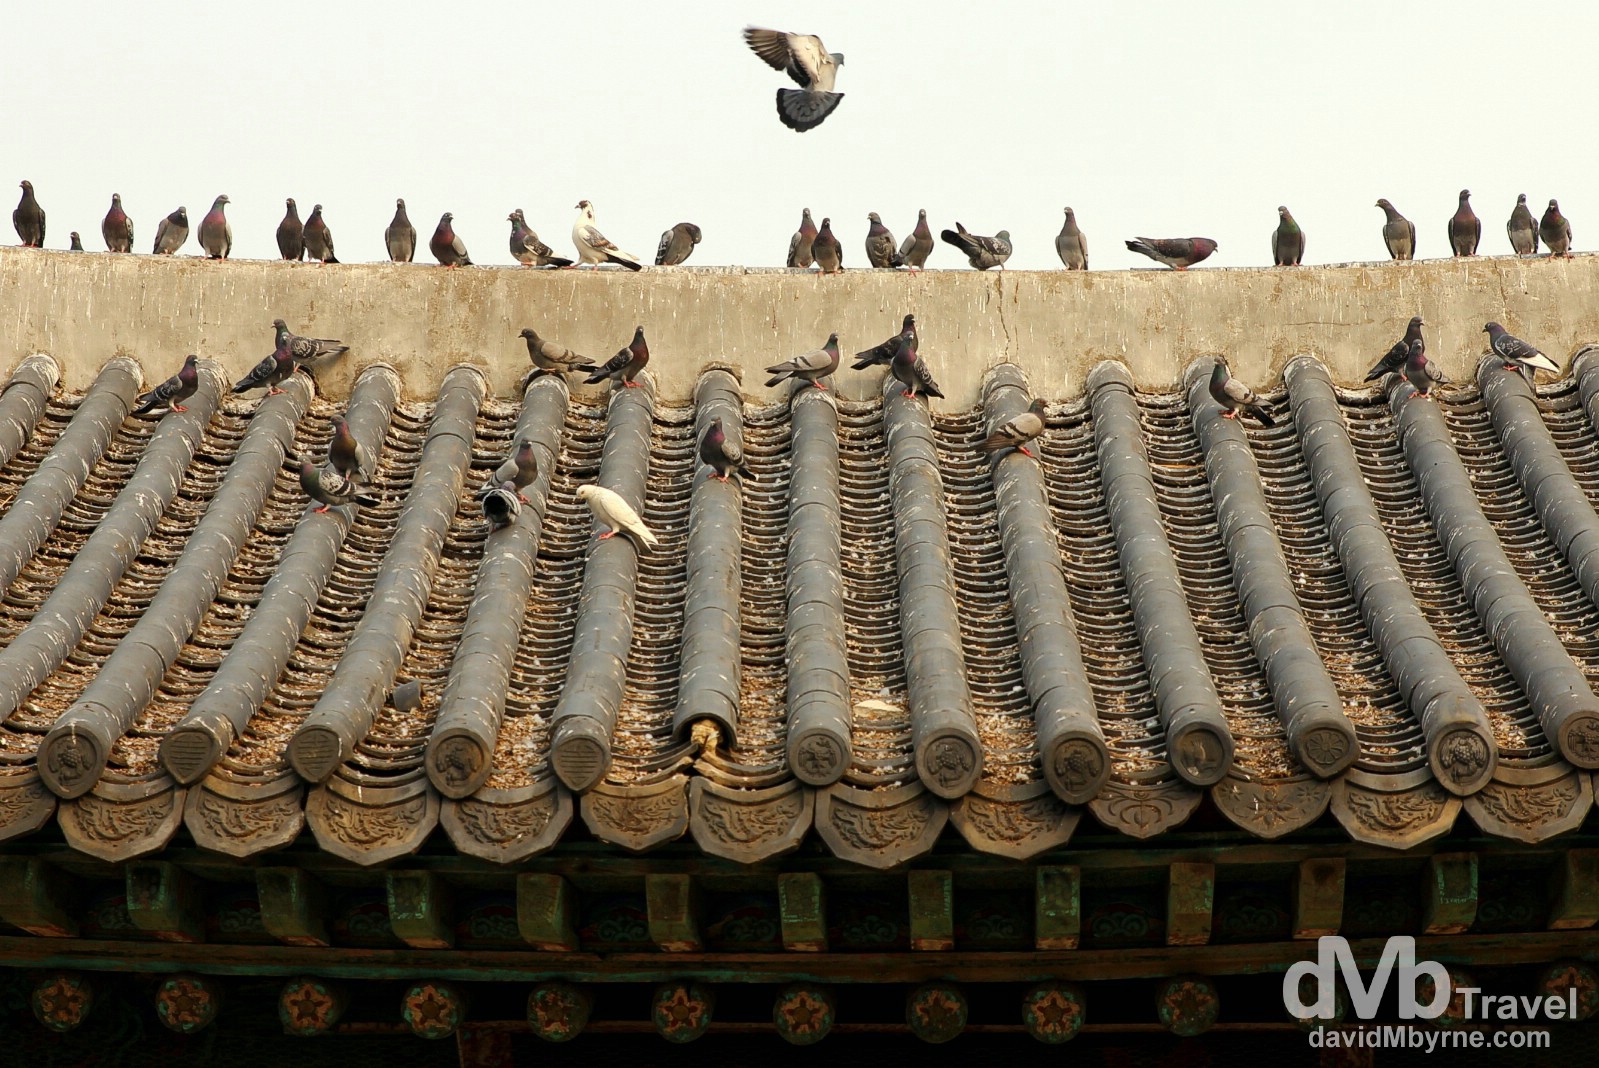 Pigeons on a roof of a section of the Suwon Hwaseong Fortress in Suwon, South Korea. February 23rd, 2014. 